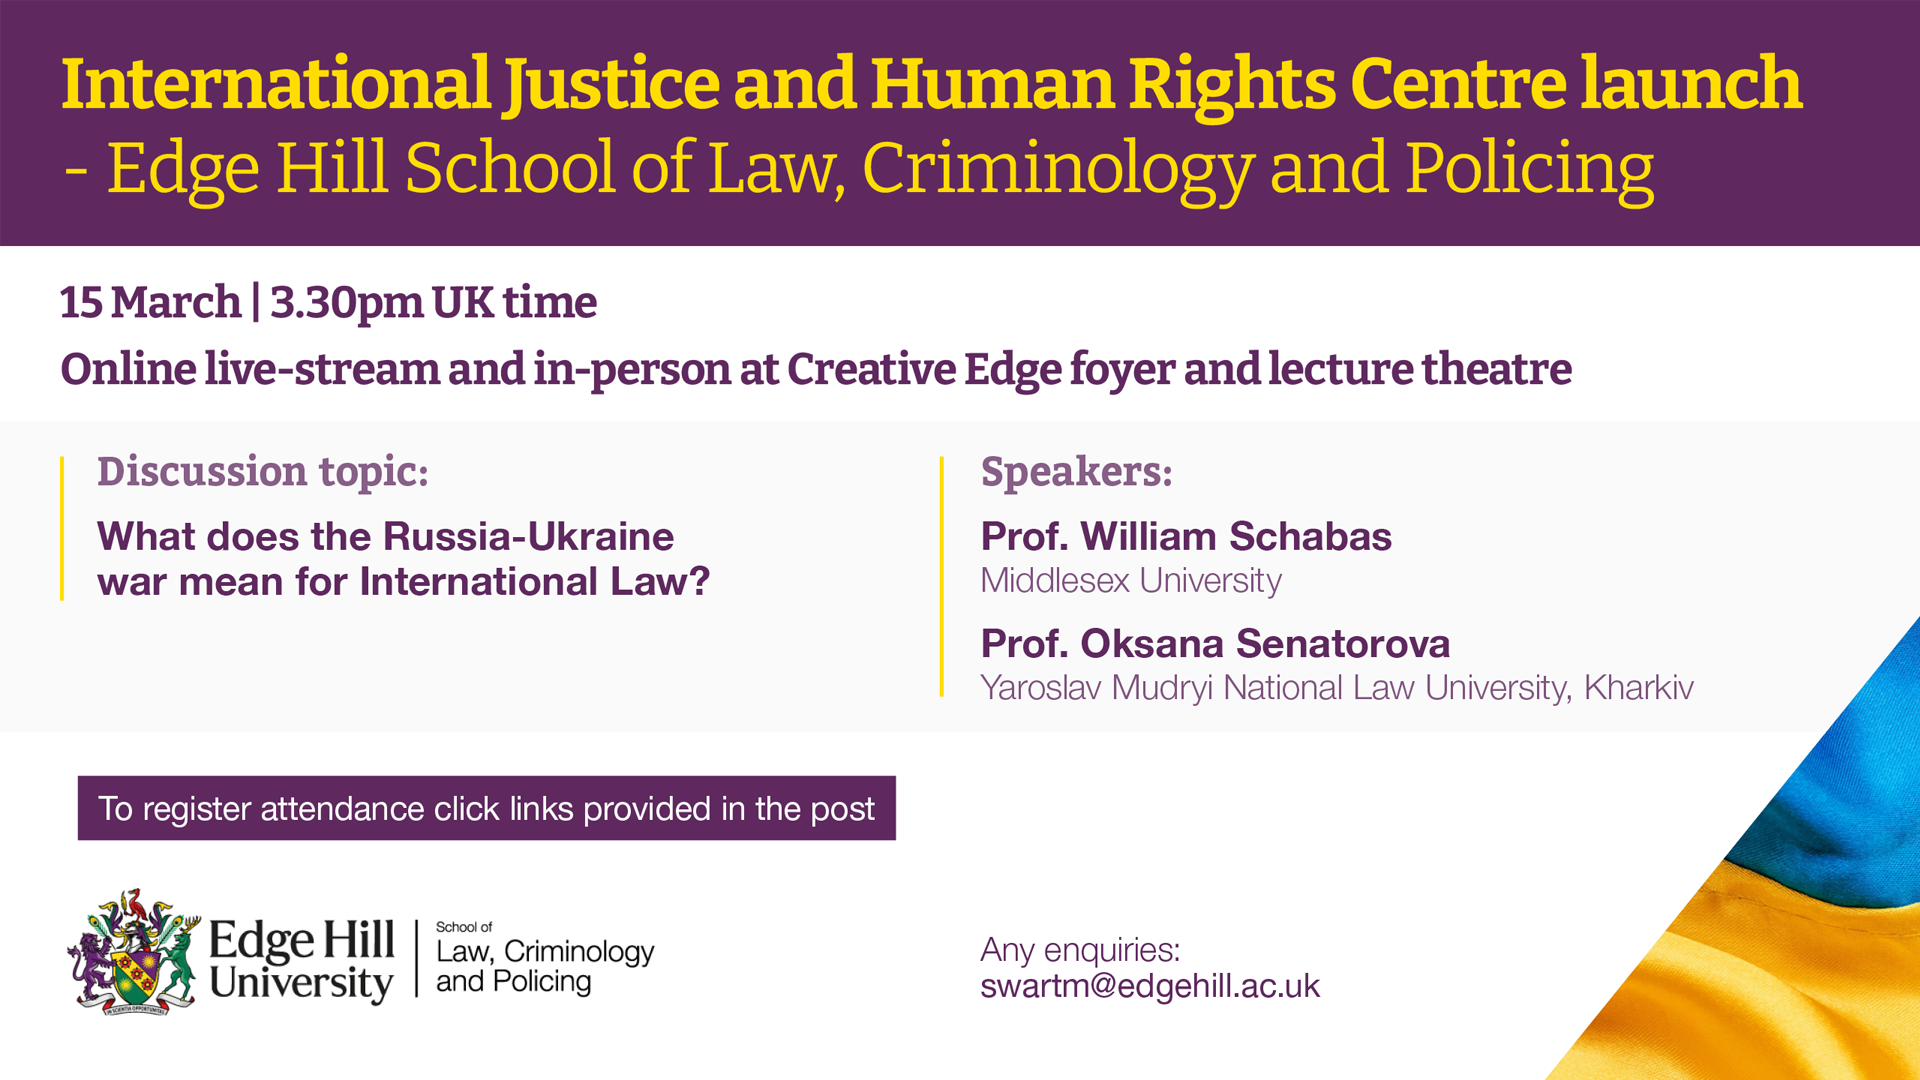 International Justice and Human Rights Centre launch promo flyer